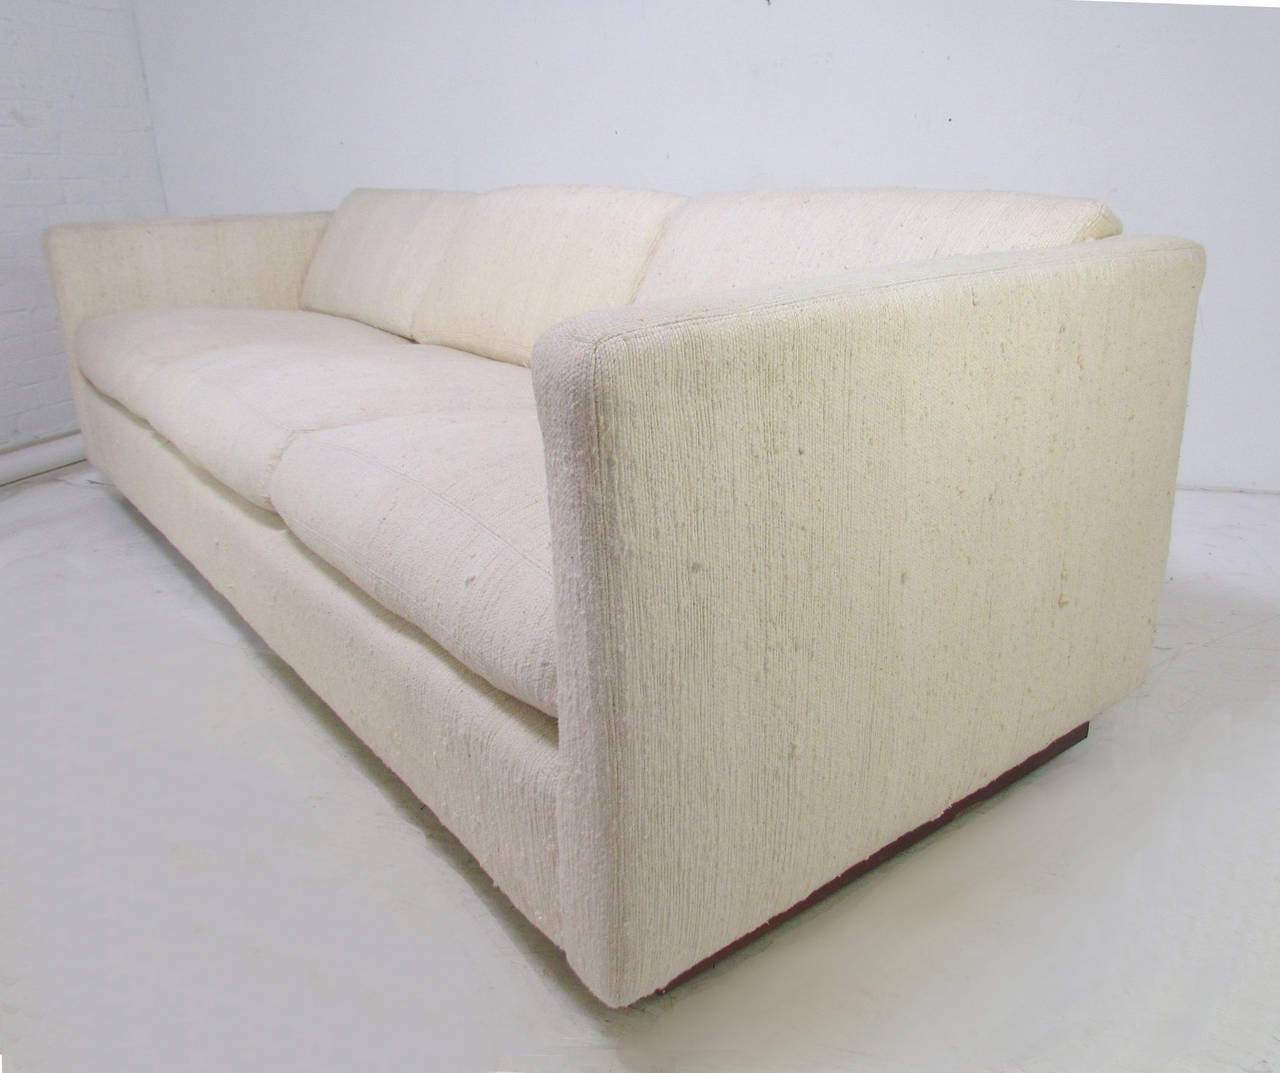 Classic modernist three-seat tuxedo sofa floating on a walnut base supported by casters, signed by Milo Baughman for Thayer Coggin, circa 1970s. Original Haitian cotton upholstery.

Measures: 88